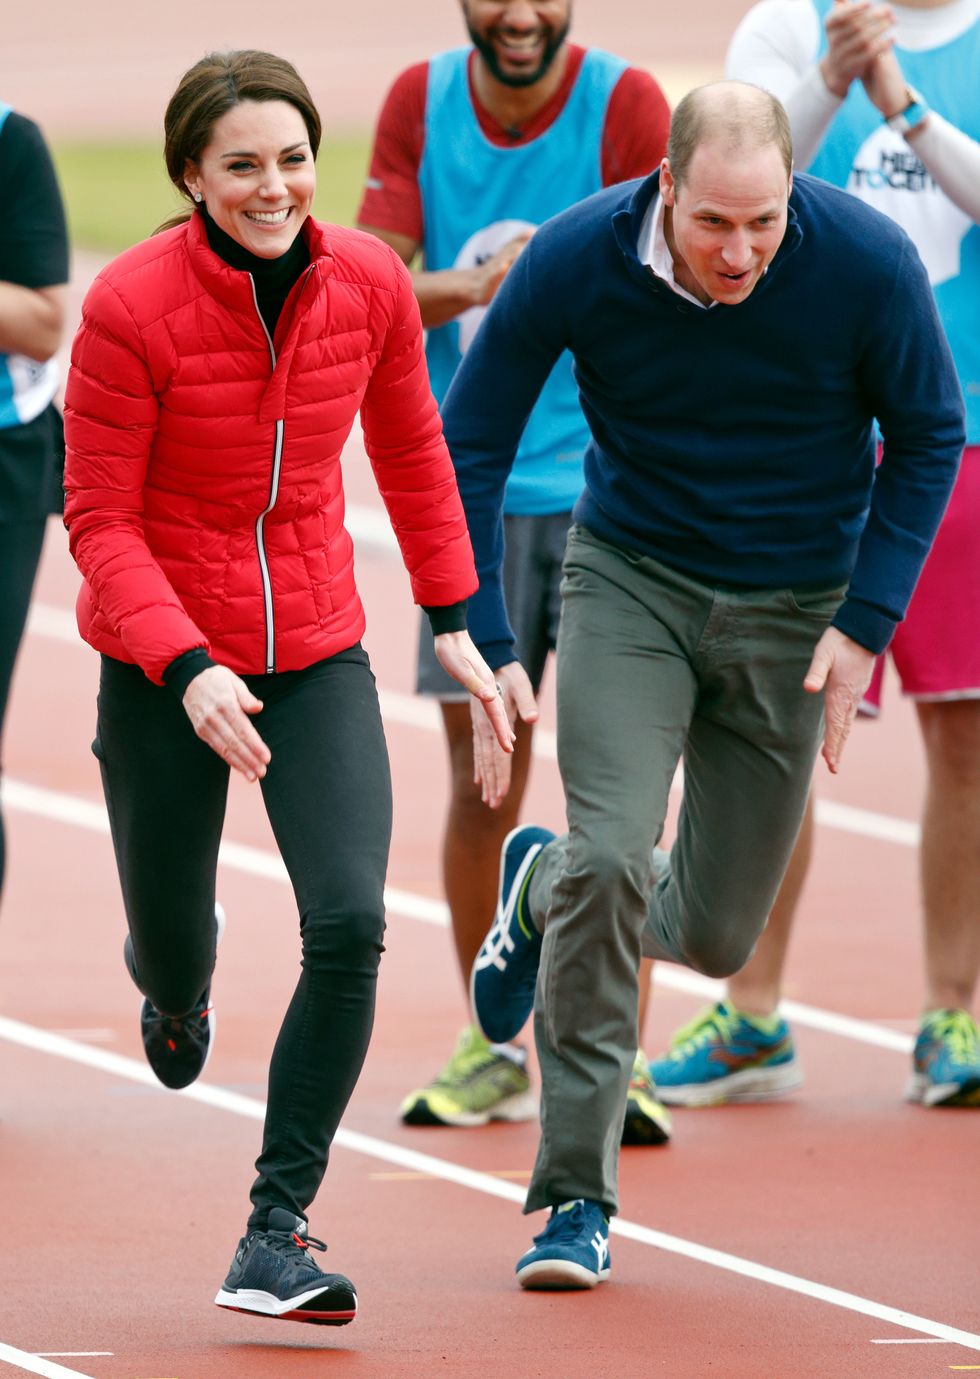 LONDON, UNITED KINGDOM - FEBRUARY 05: (EMBARGOED FOR PUBLICATION IN UK NEWSPAPERS UNTIL 48 HOURS AFTER CREATE DATE AND TIME) Catherine, Duchess of Cambridge and Prince William, Duke of Cambridge take part in a running race against Prince Harry as they join a Team Heads Together London Marathon Training Day at the Queen Elizabeth Olympic Park on February 5, 2017 in London, England. (Photo by Max Mumby/Indigo/Getty Images)